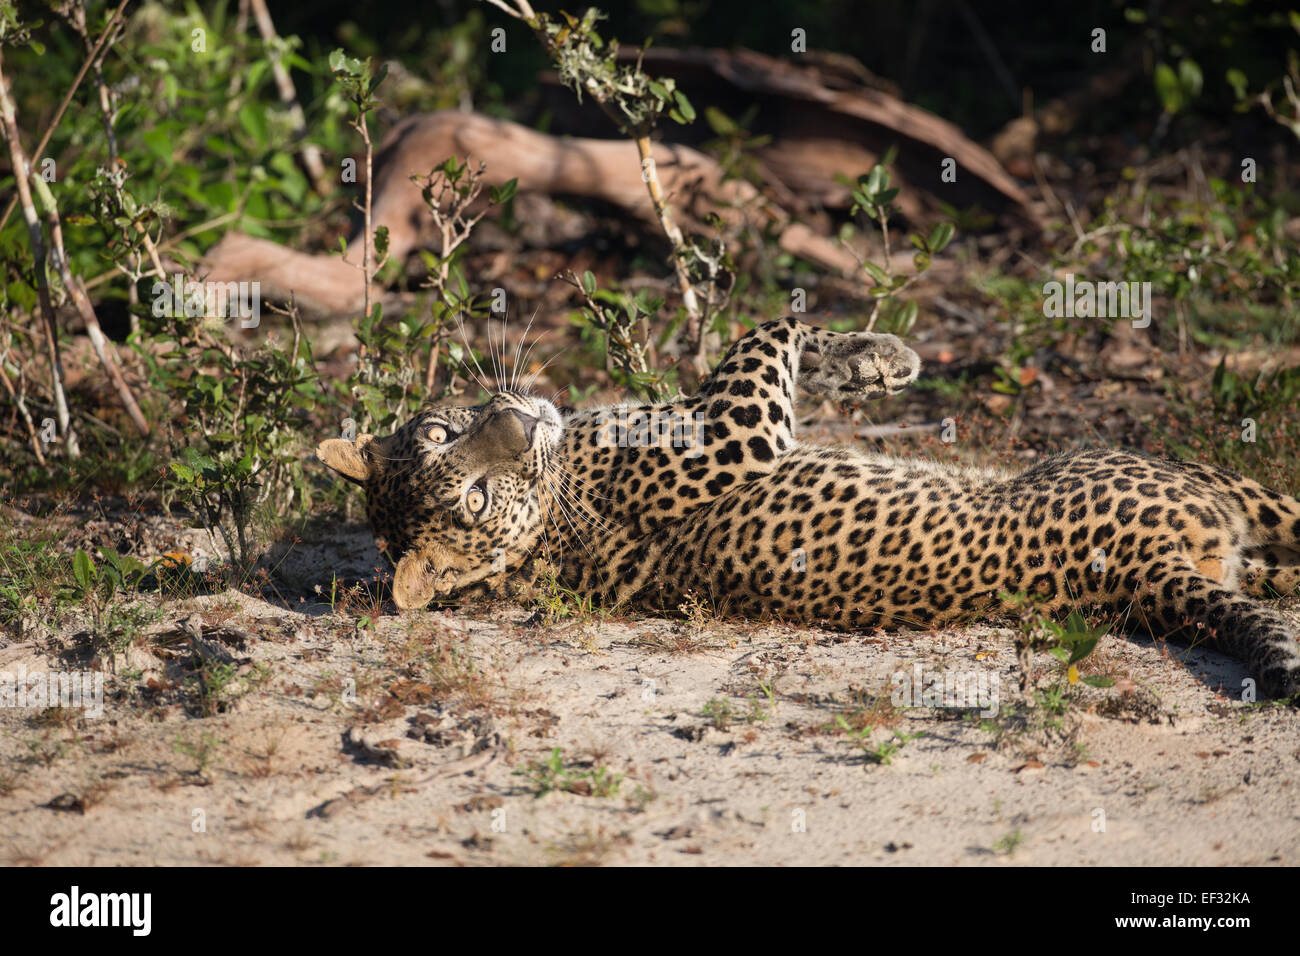 A lazy leopard rolls on its back on soft sand while sunning itself in the early morning sunlight at Wilpattu NP, Sri Lanka. Stock Photo